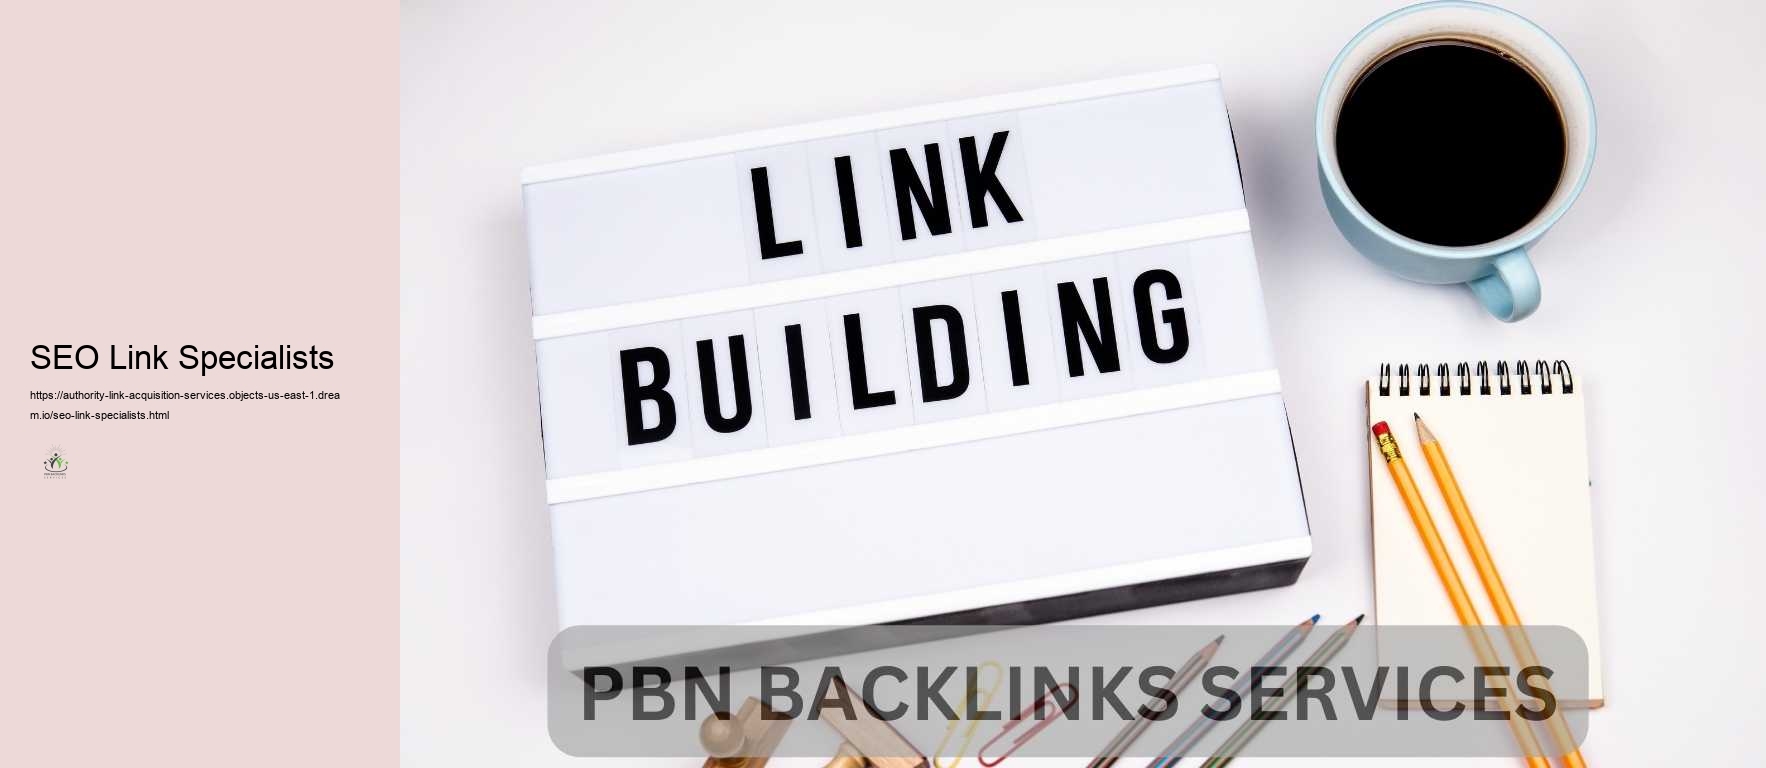 SEO Link Specialists